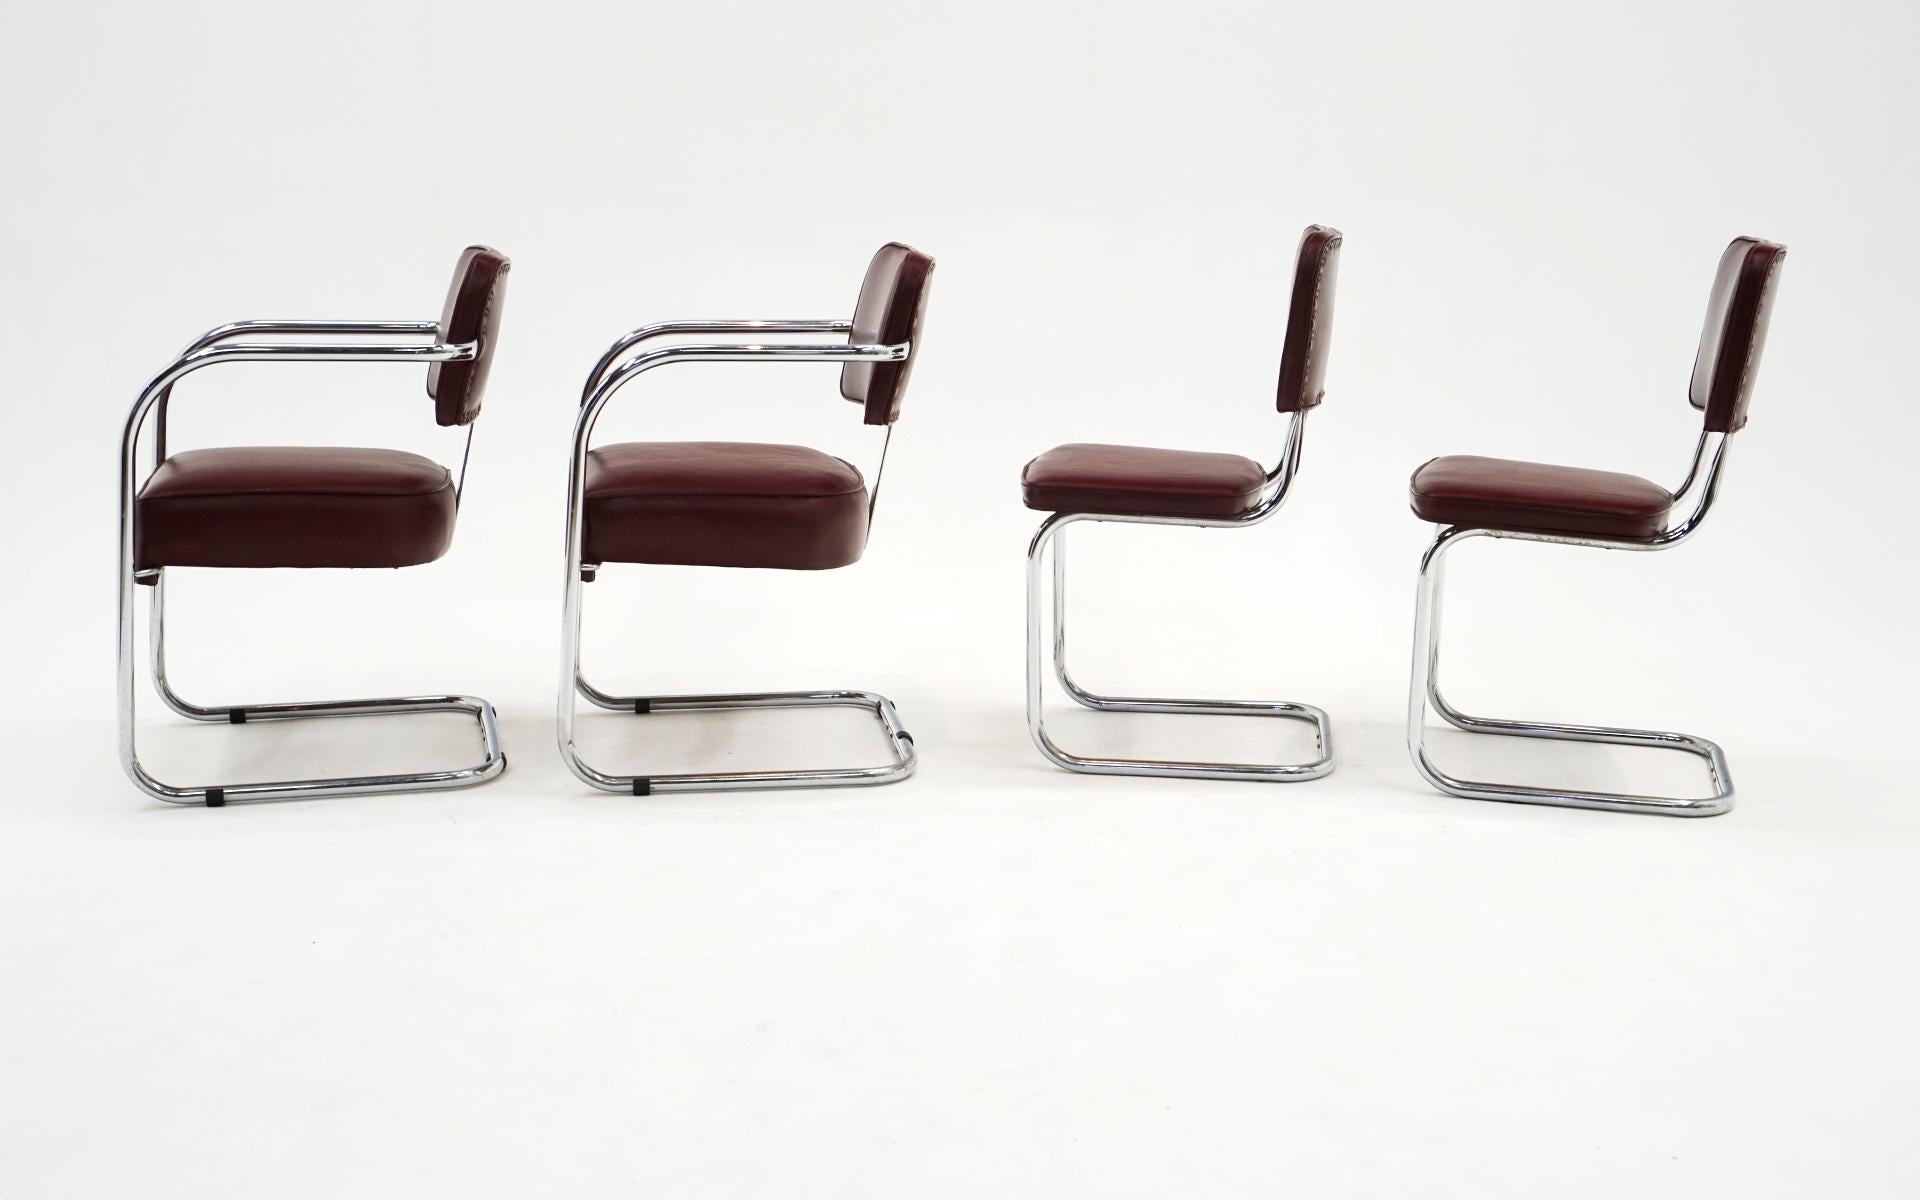 Machine Age Set of Four 1940s Tubular Chrome Chairs in Original Oxblood Leather like Vinyl For Sale